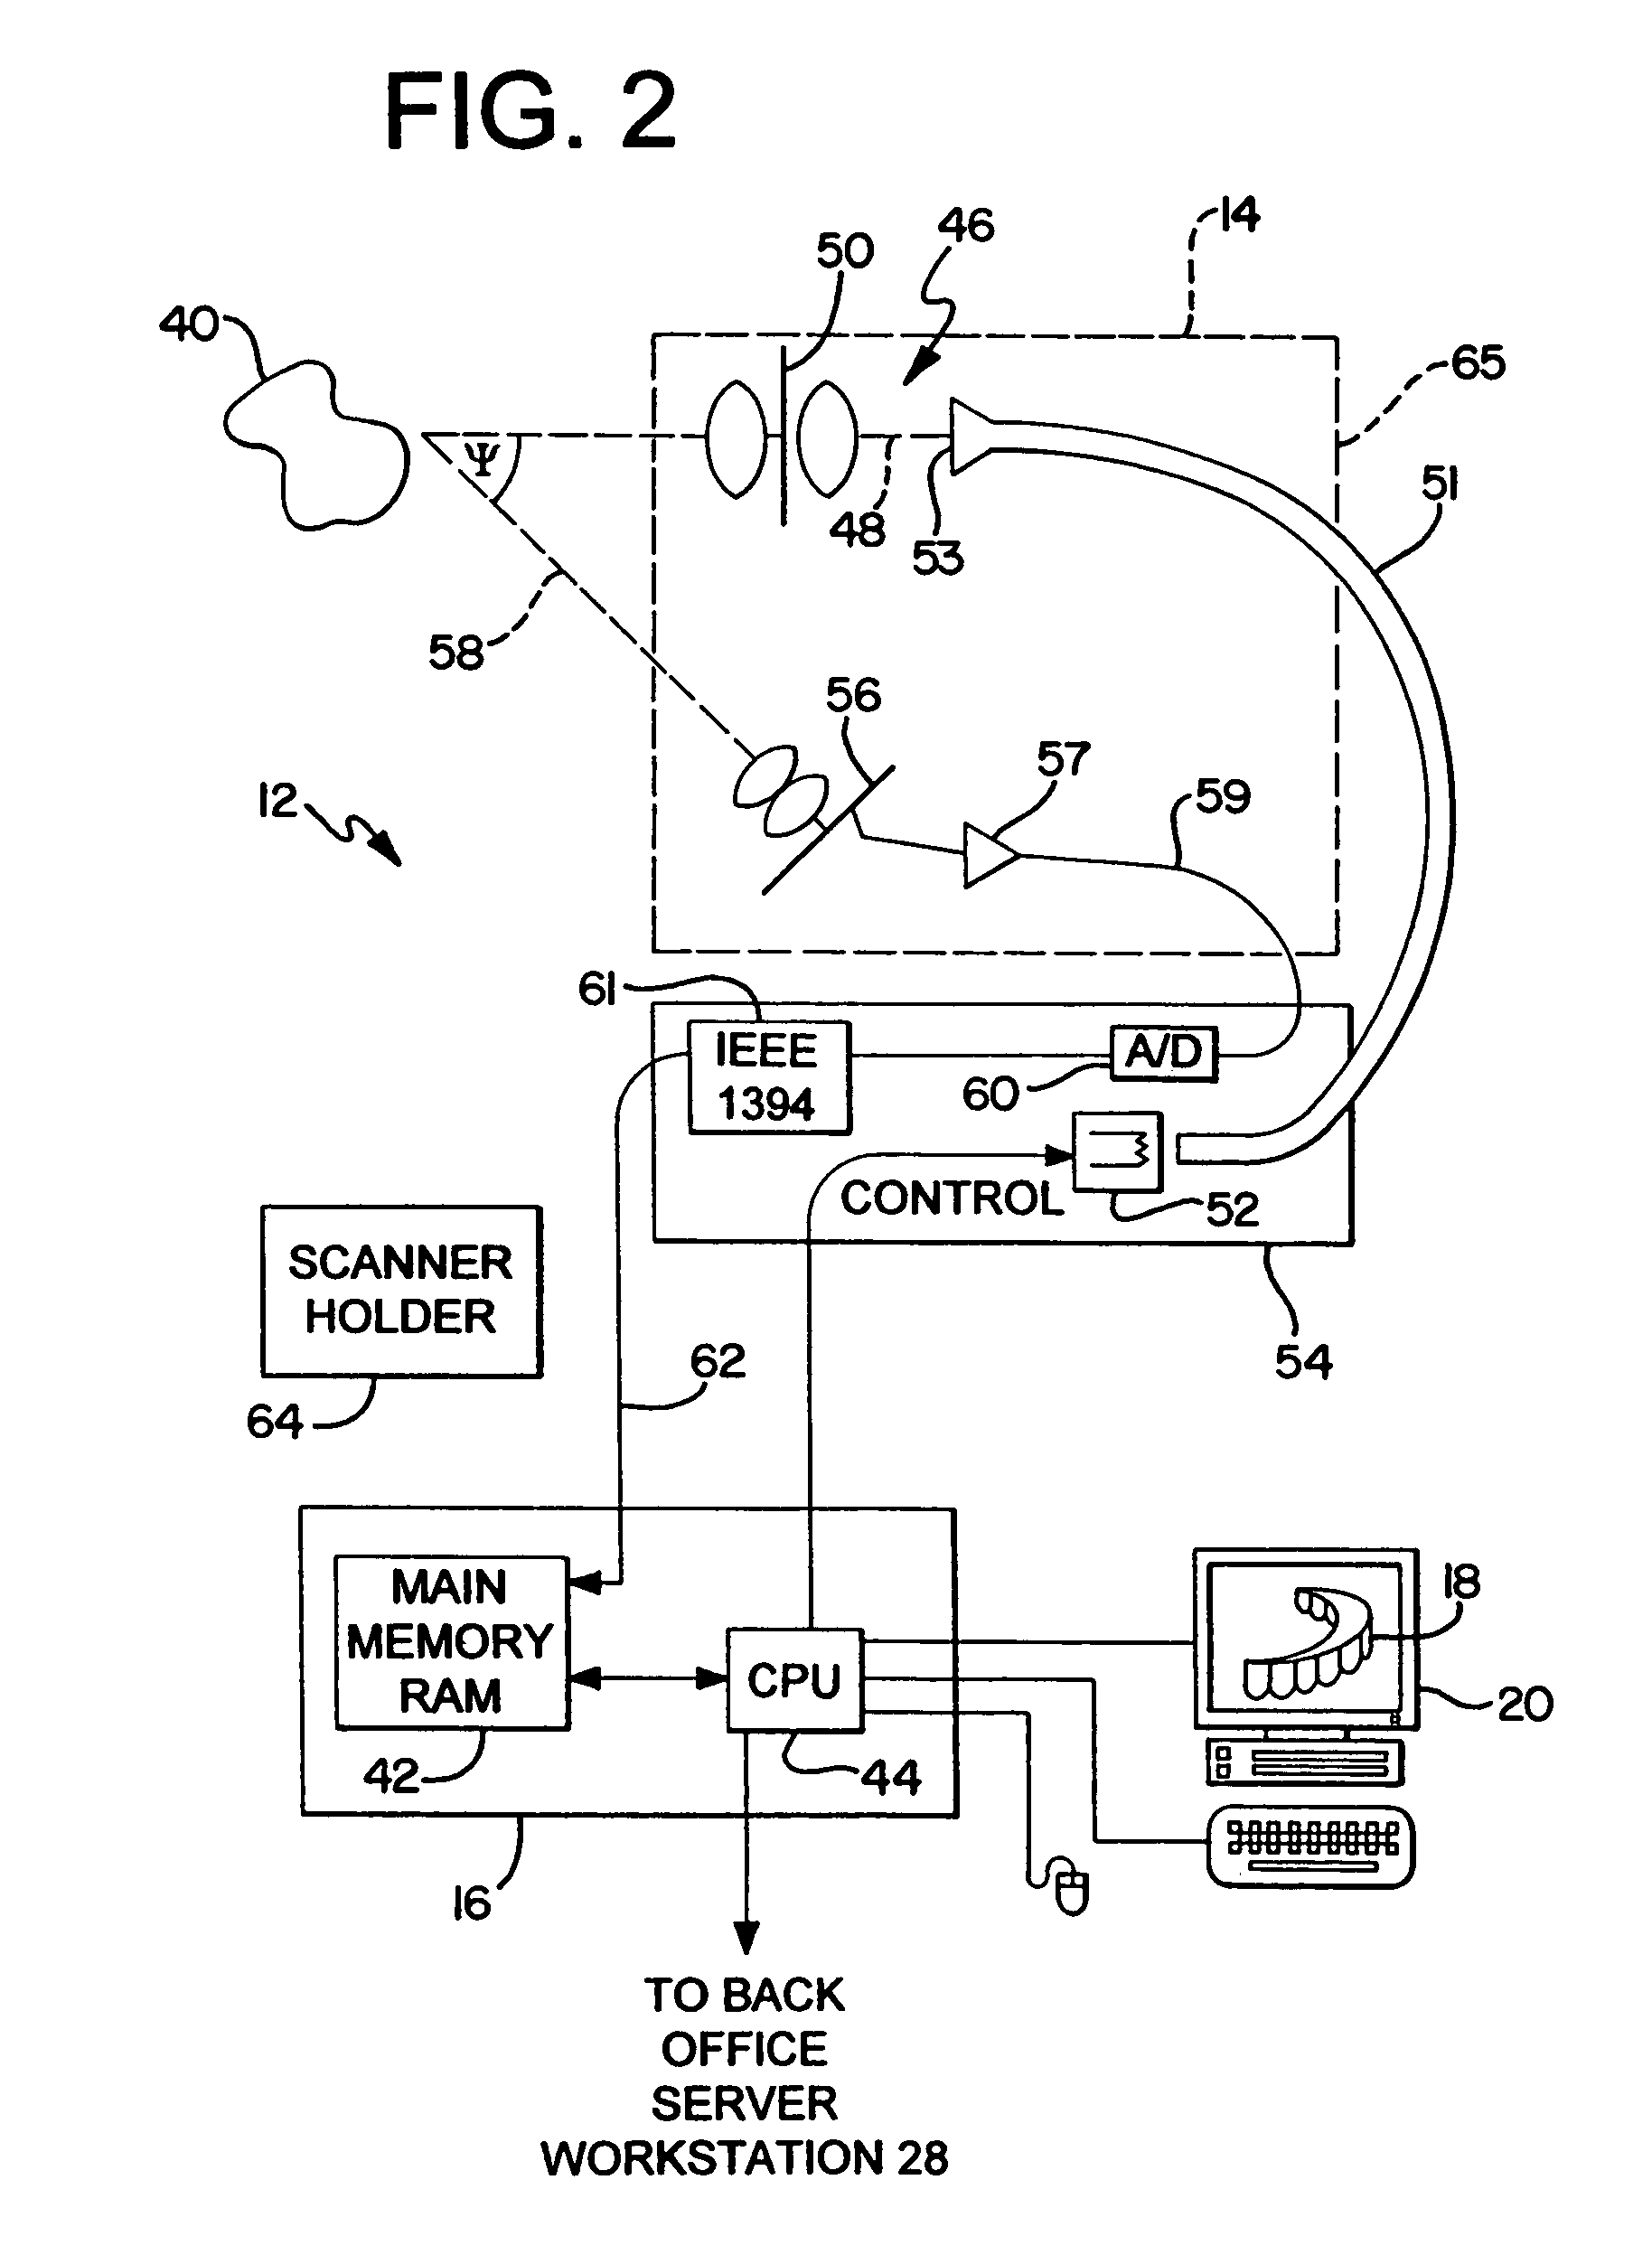 Method and apparatus for registering a known digital object to scanned 3-D model